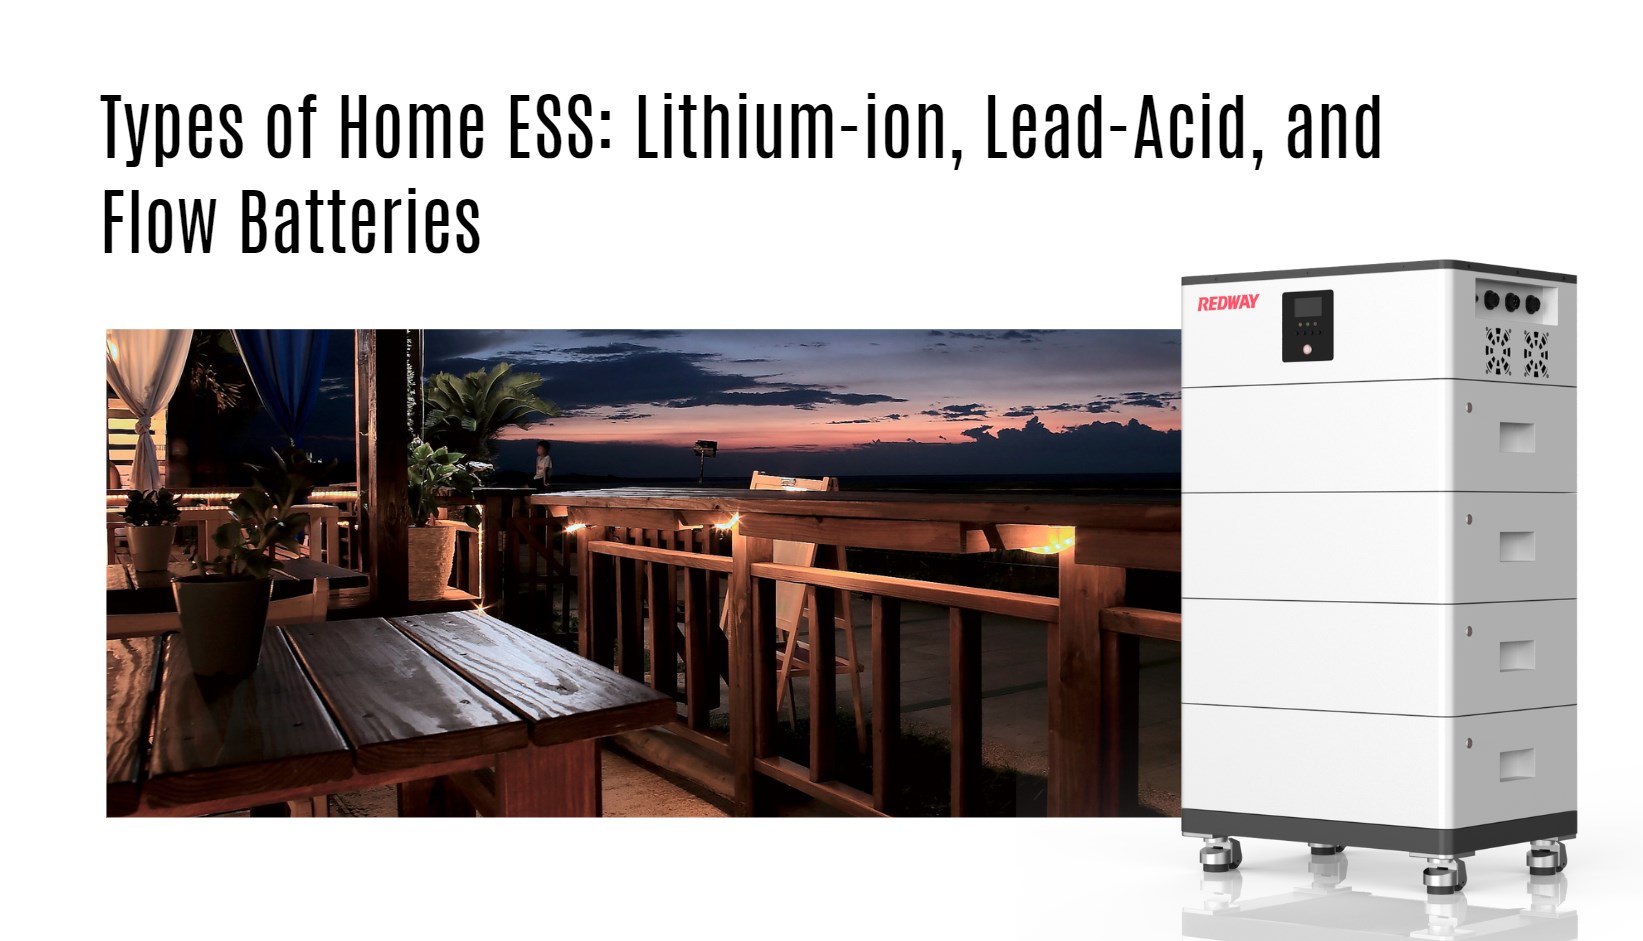 Types of Home ESS: Lithium-ion, Lead-Acid, and Flow Batteries